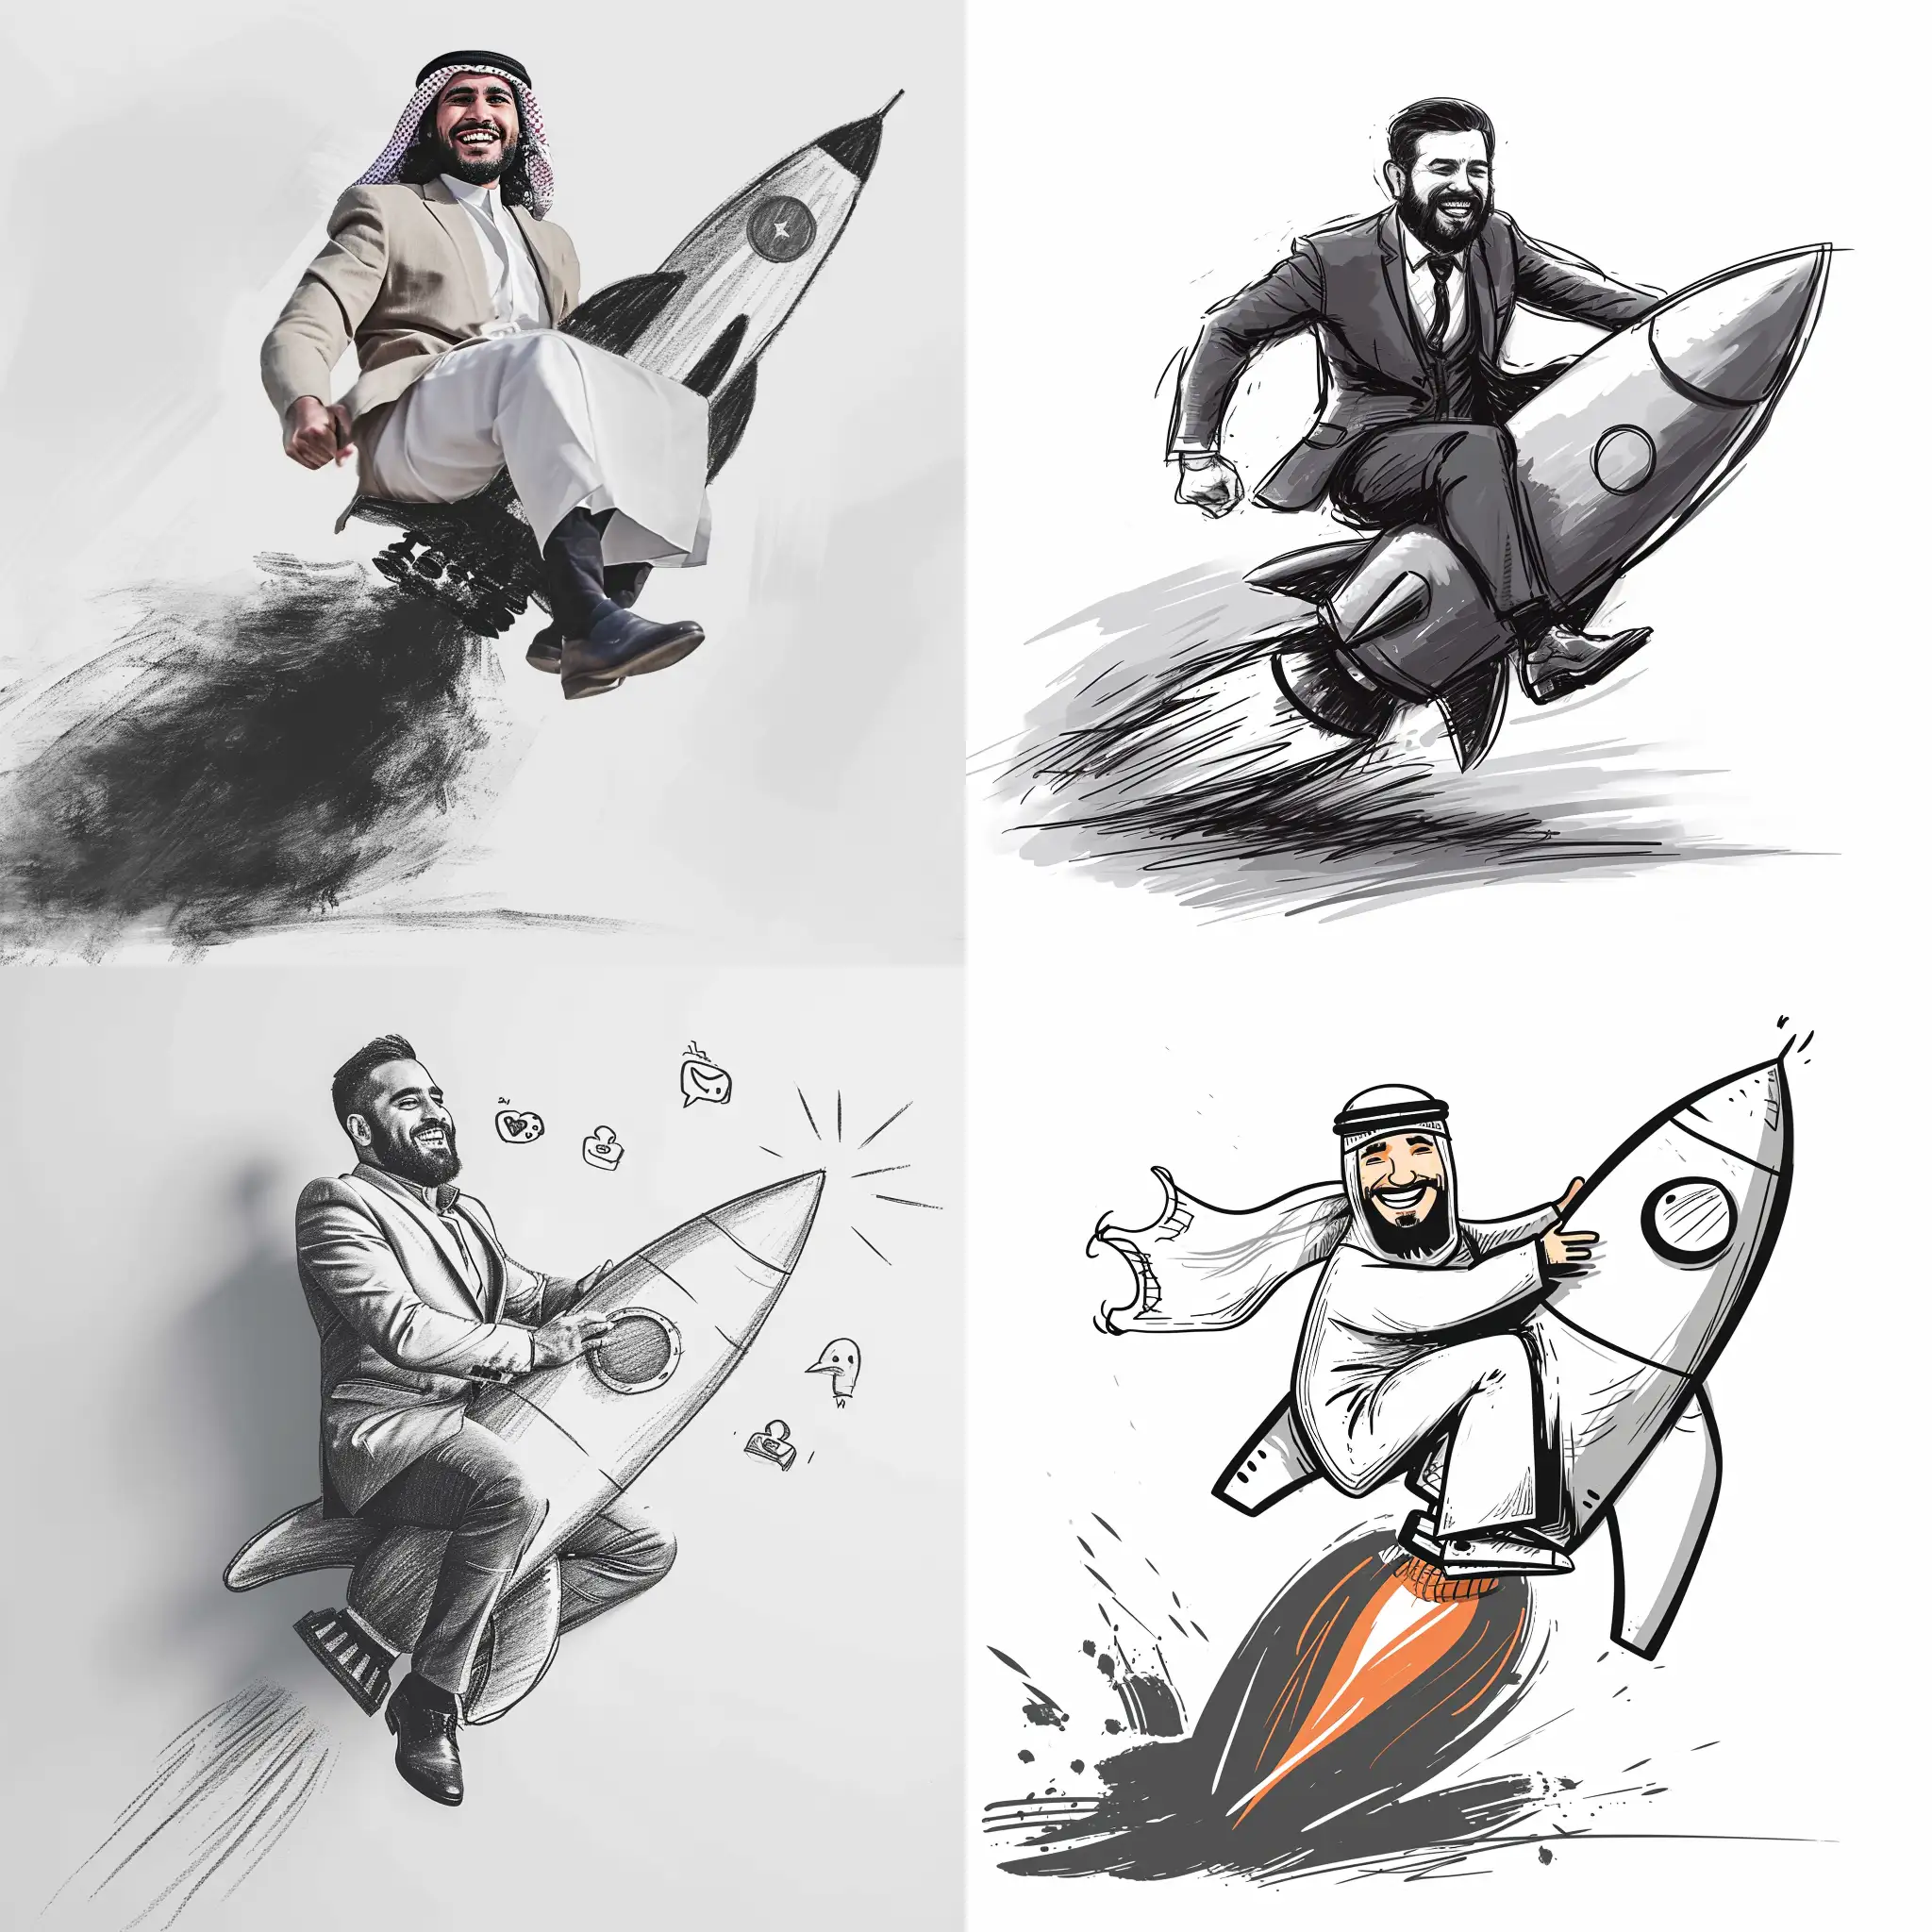 A successful and happy Arabic businessman from Yemen who aims to achieve a large number of followers on social media sites, he is riding rocket on white background,  chalk sketch style, white background.